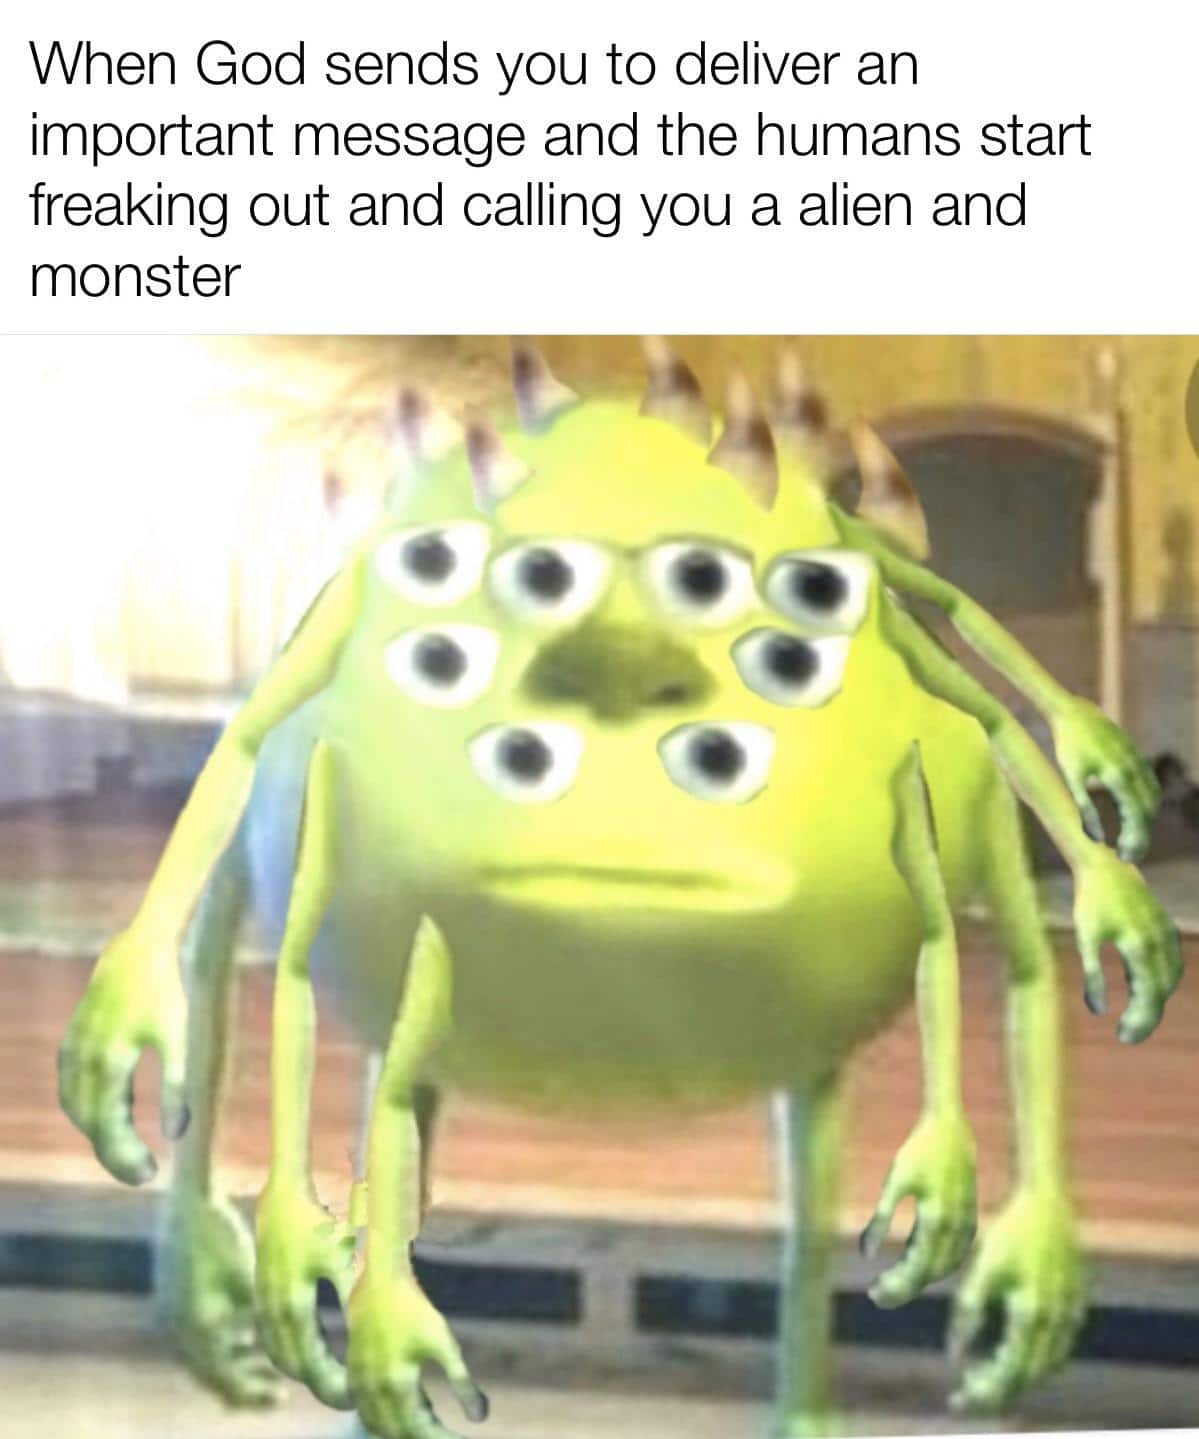 Christian, Sad Christian Memes Christian, Sad text: When God sends you to deliver an important message and the humans start freaking out and calling you a alien and monster 